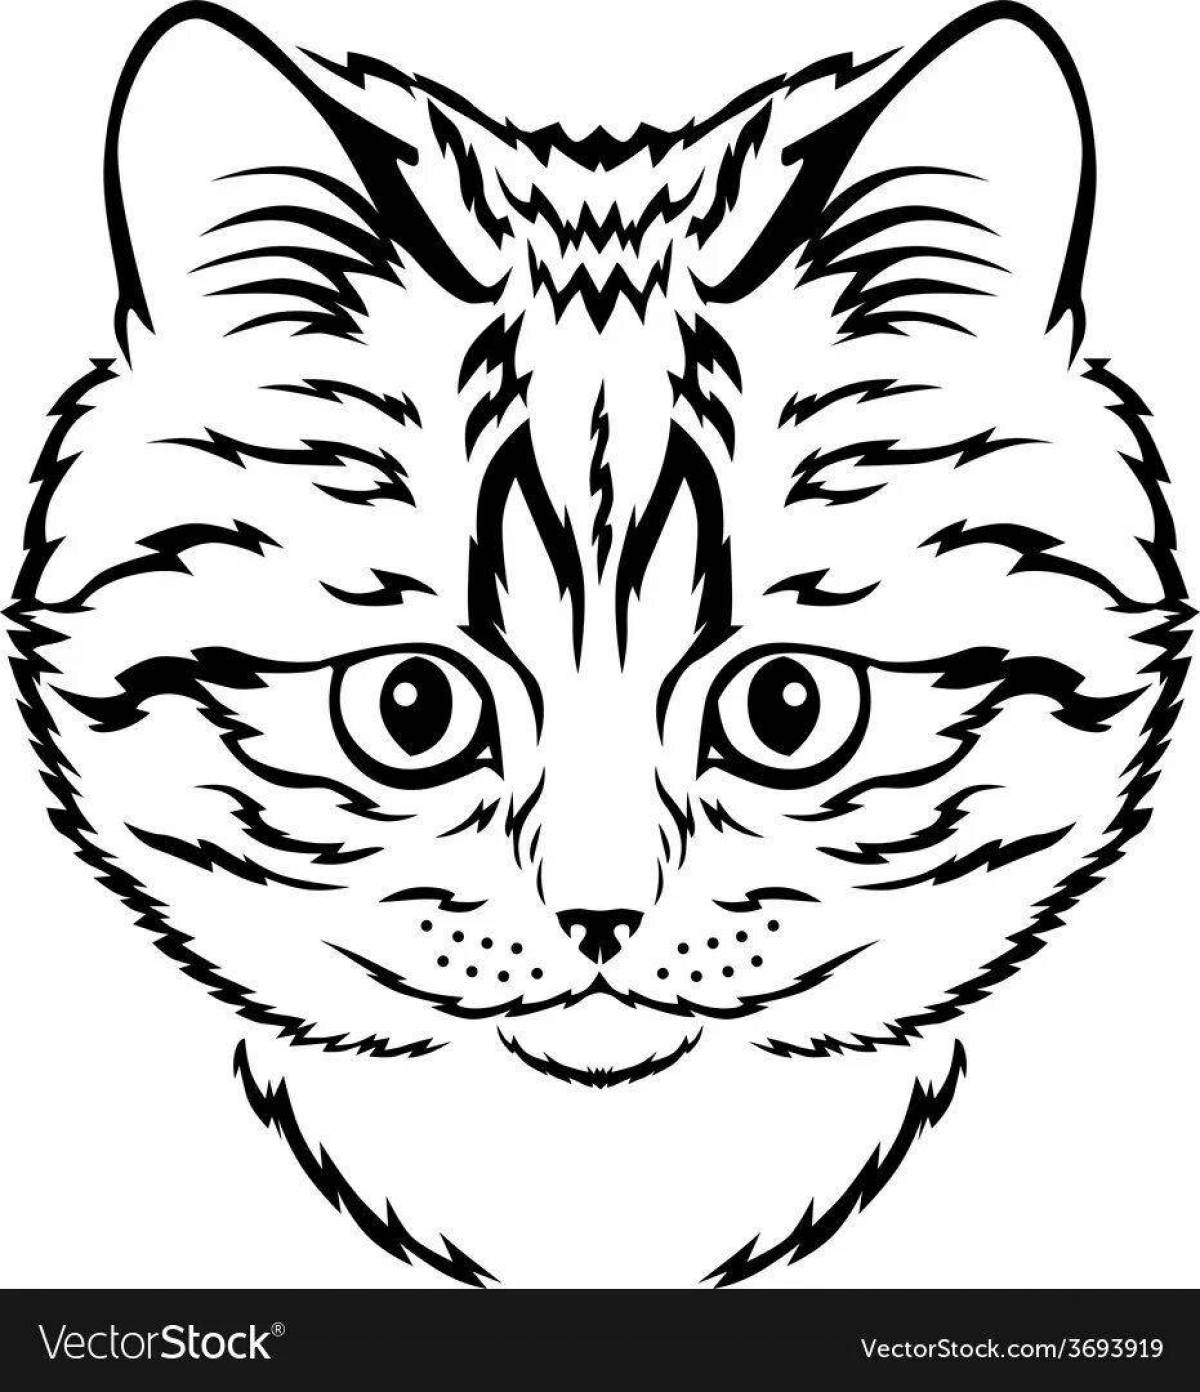 Coloring book charming muzzle of a cat